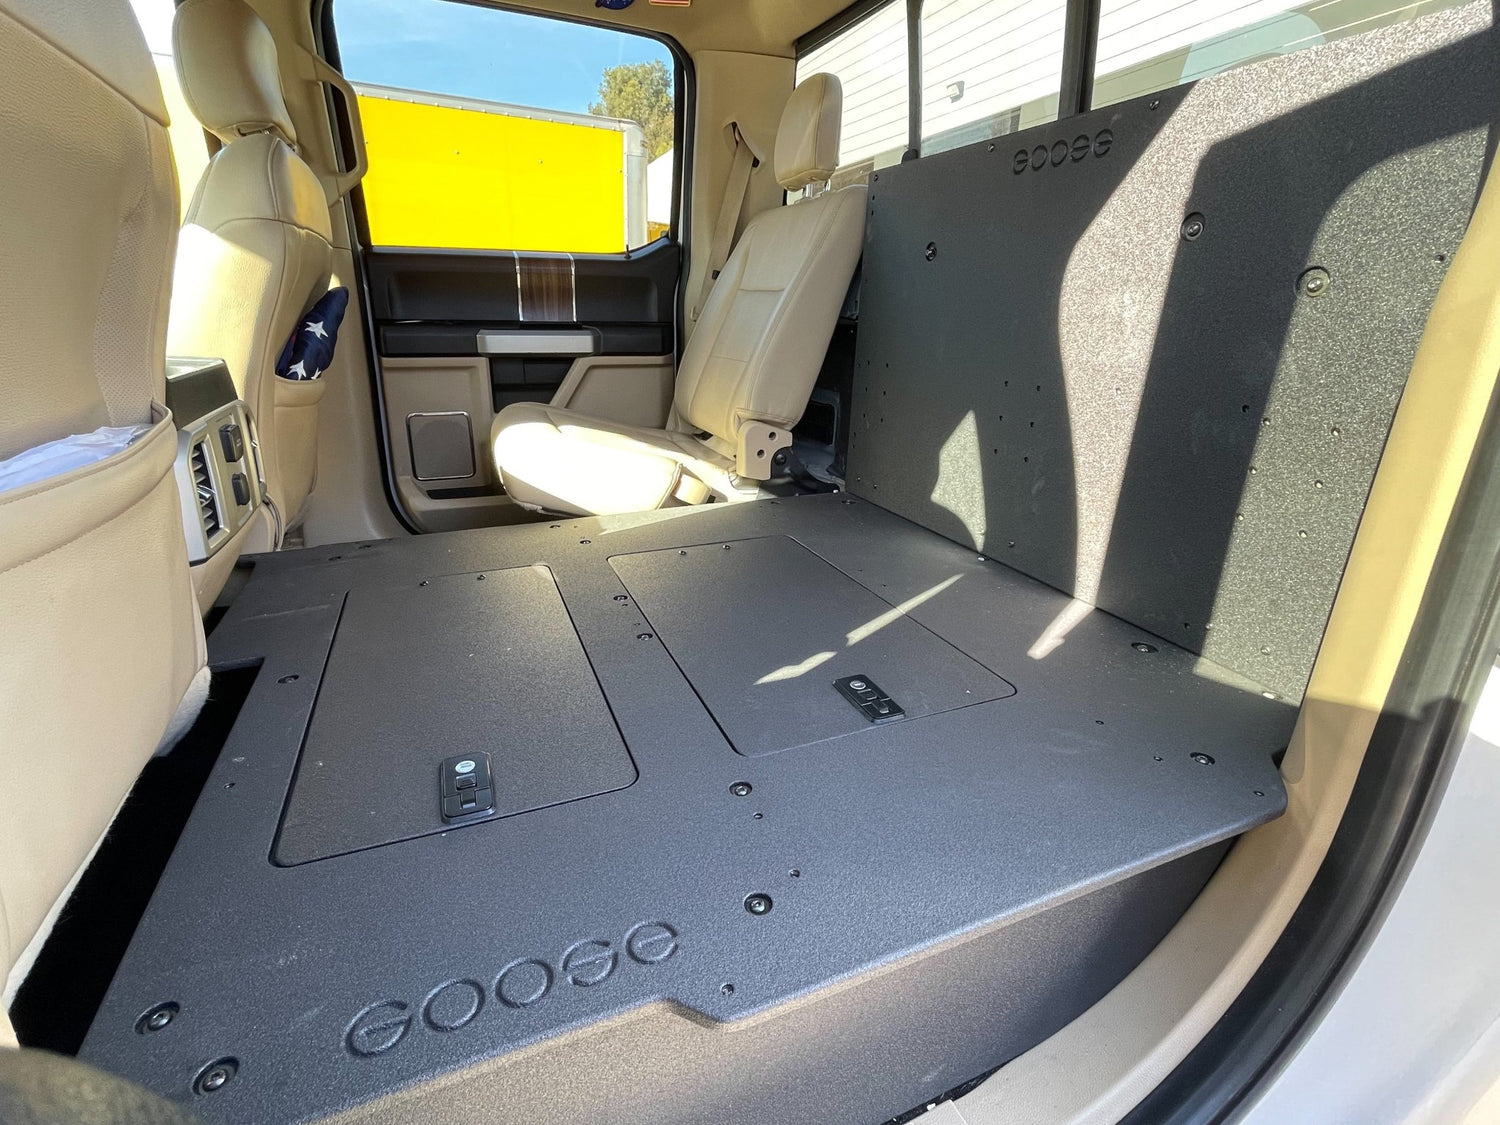 Goose Gear Ford Super Duty F250-F550 2017-Present 4th Gen. Crew Cab - Second Row Seat Delete Plate System